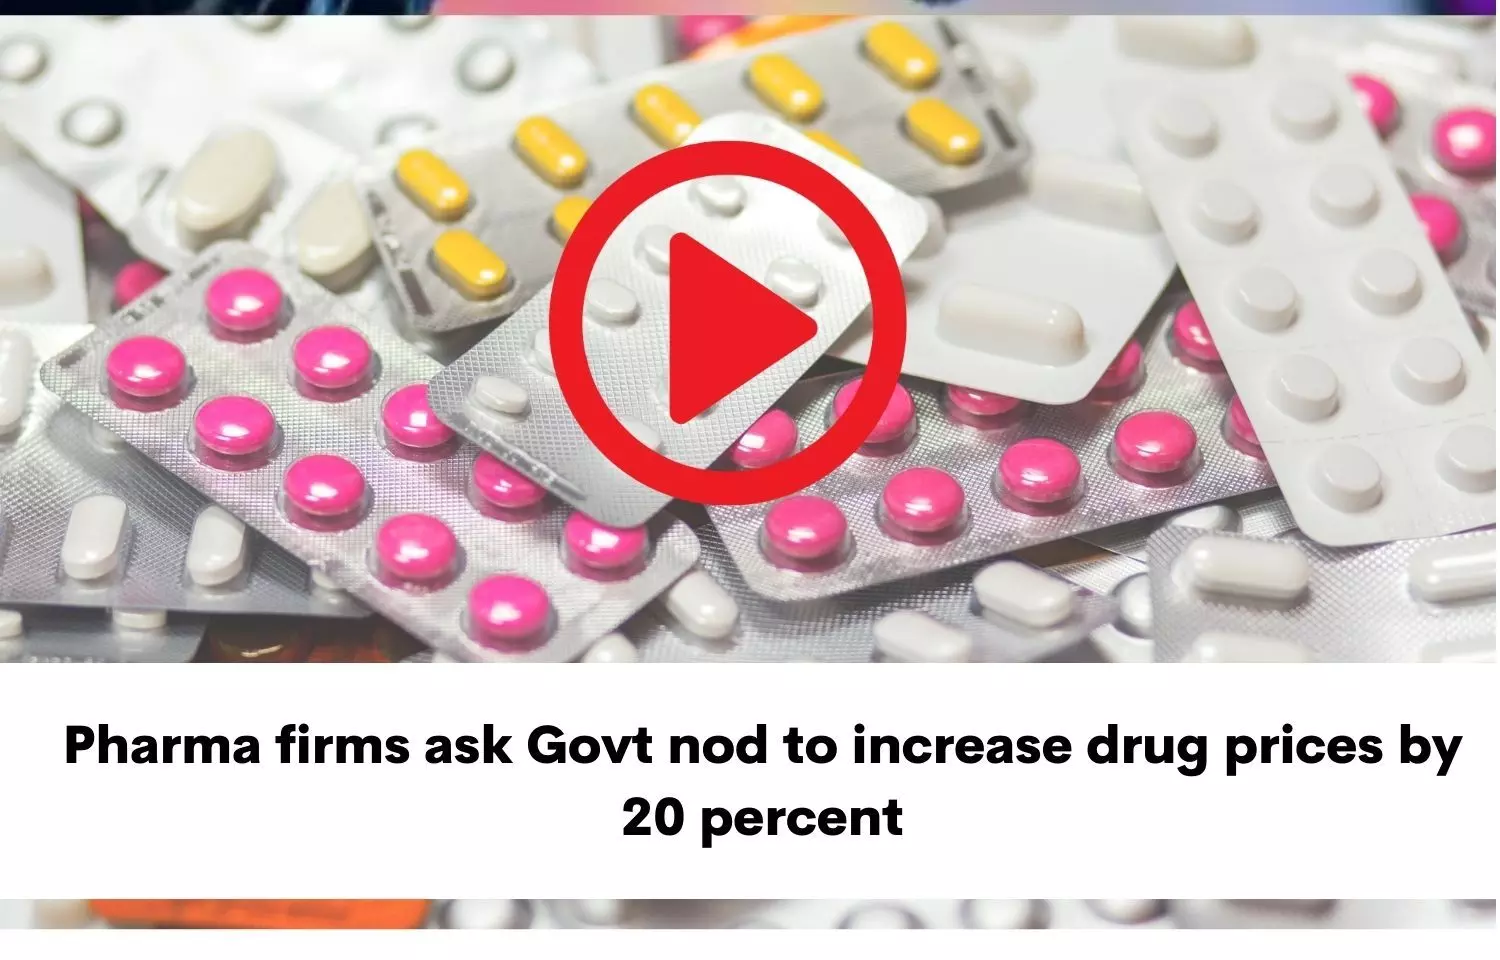 Pharma firms ask Govt nod to increase drug prices by 20 percent